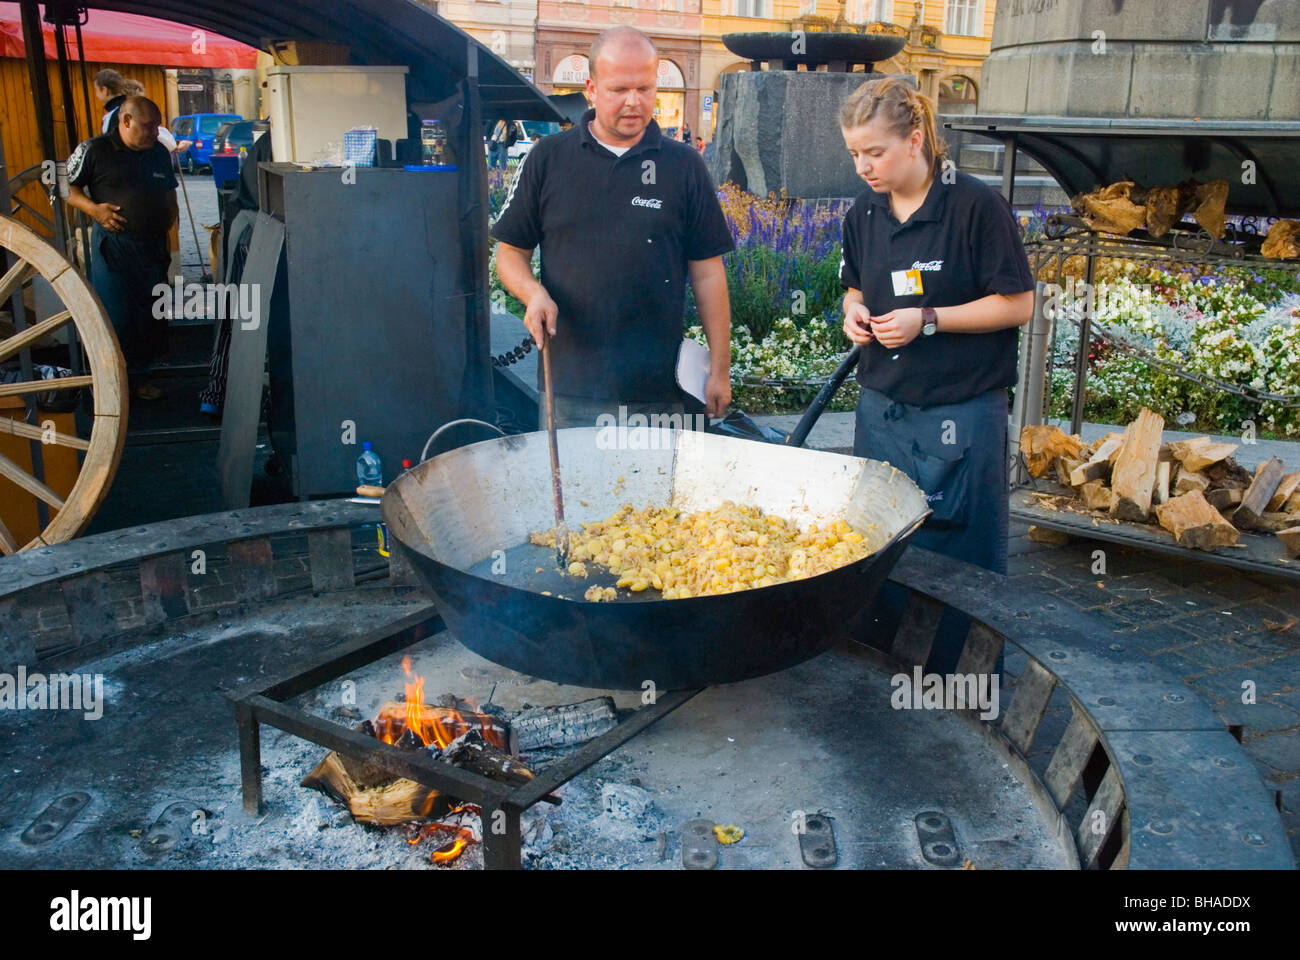 https://c8.alamy.com/comp/BHADDX/food-cooked-in-a-giant-wok-pan-at-old-town-square-in-prague-czech-BHADDX.jpg